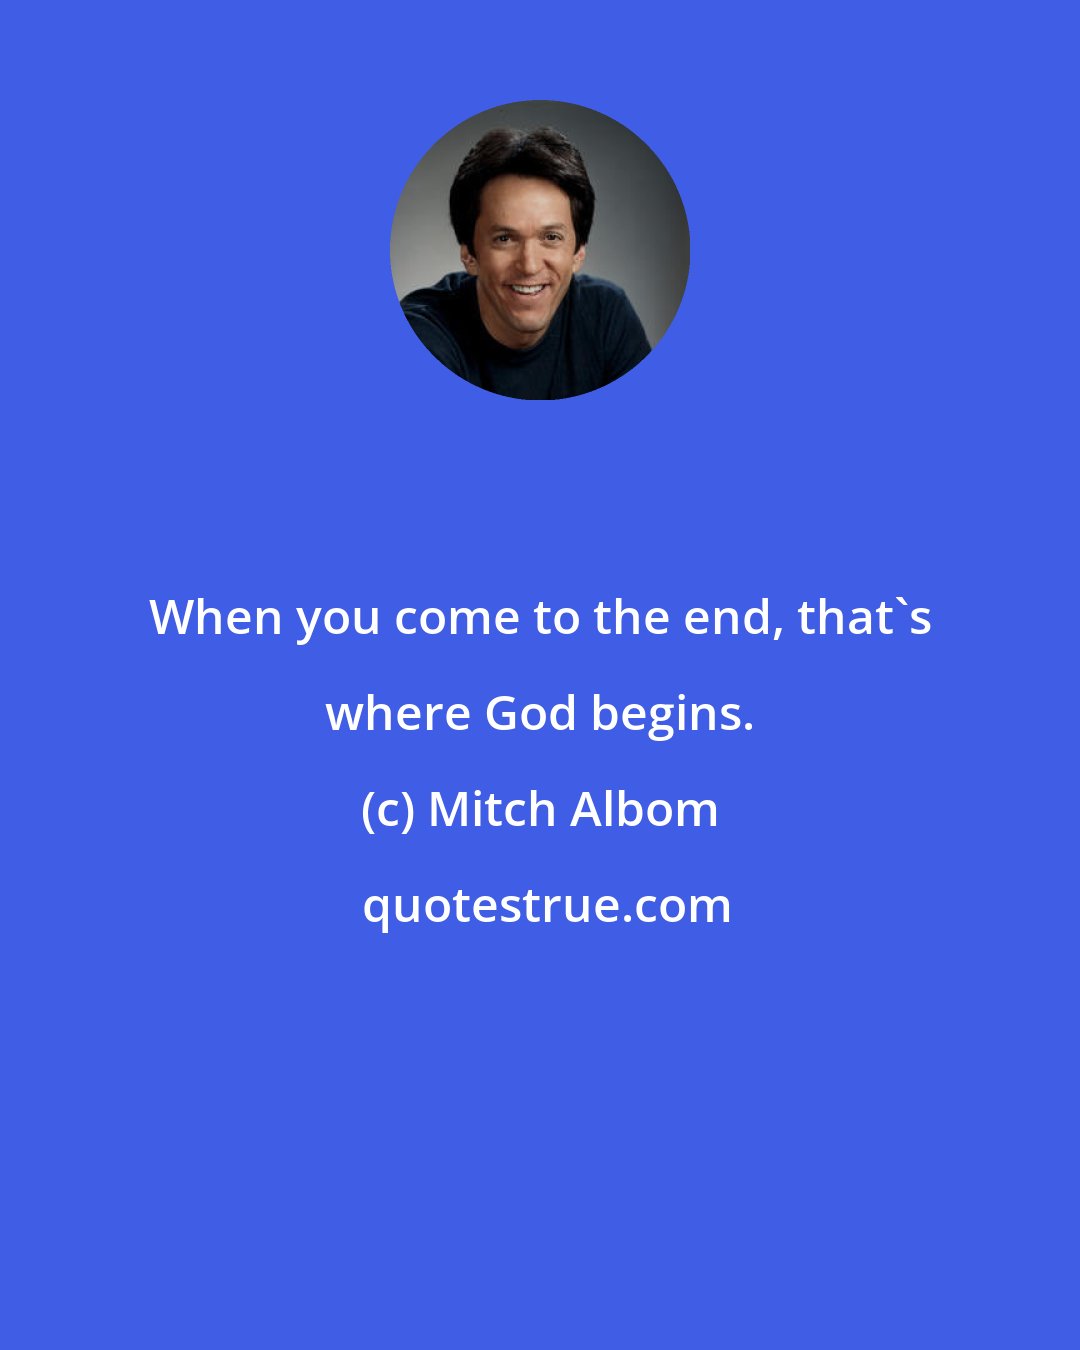 Mitch Albom: When you come to the end, that's where God begins.